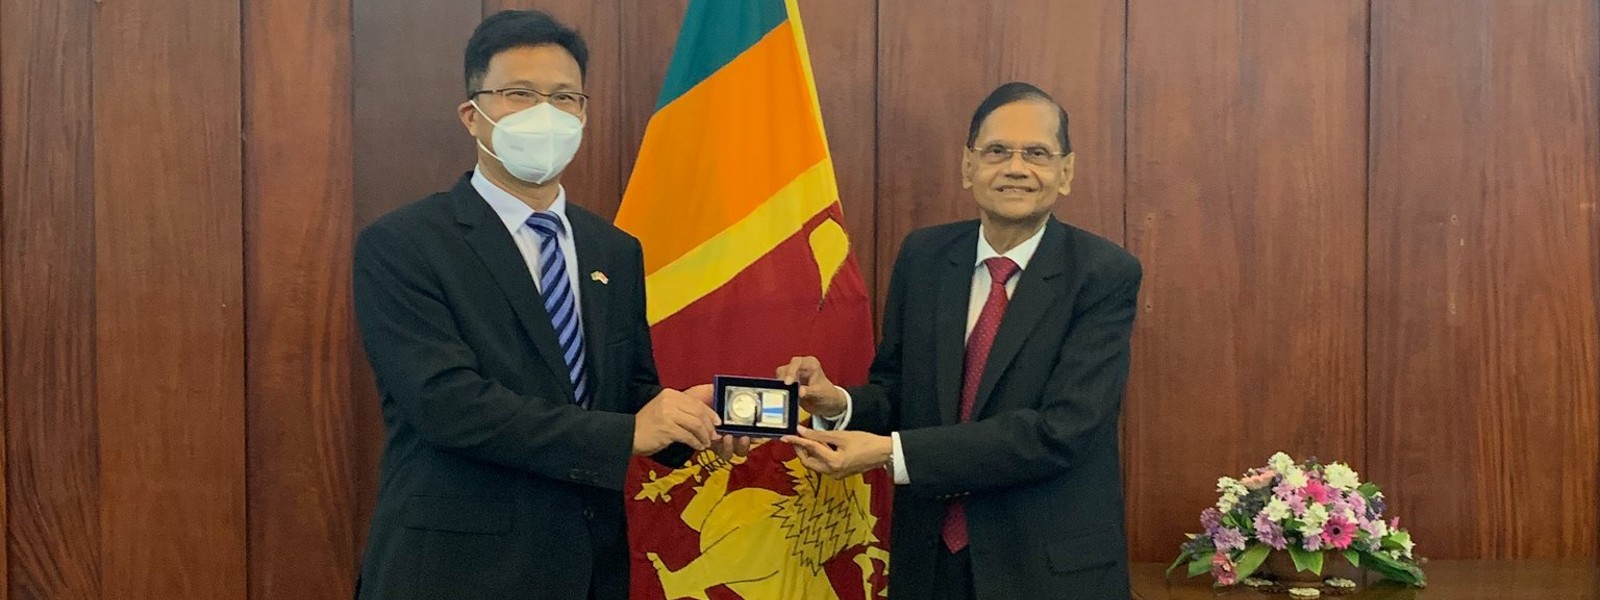 Chinese Ambassador meets with Foreign Minister, discusses China-SL FTA